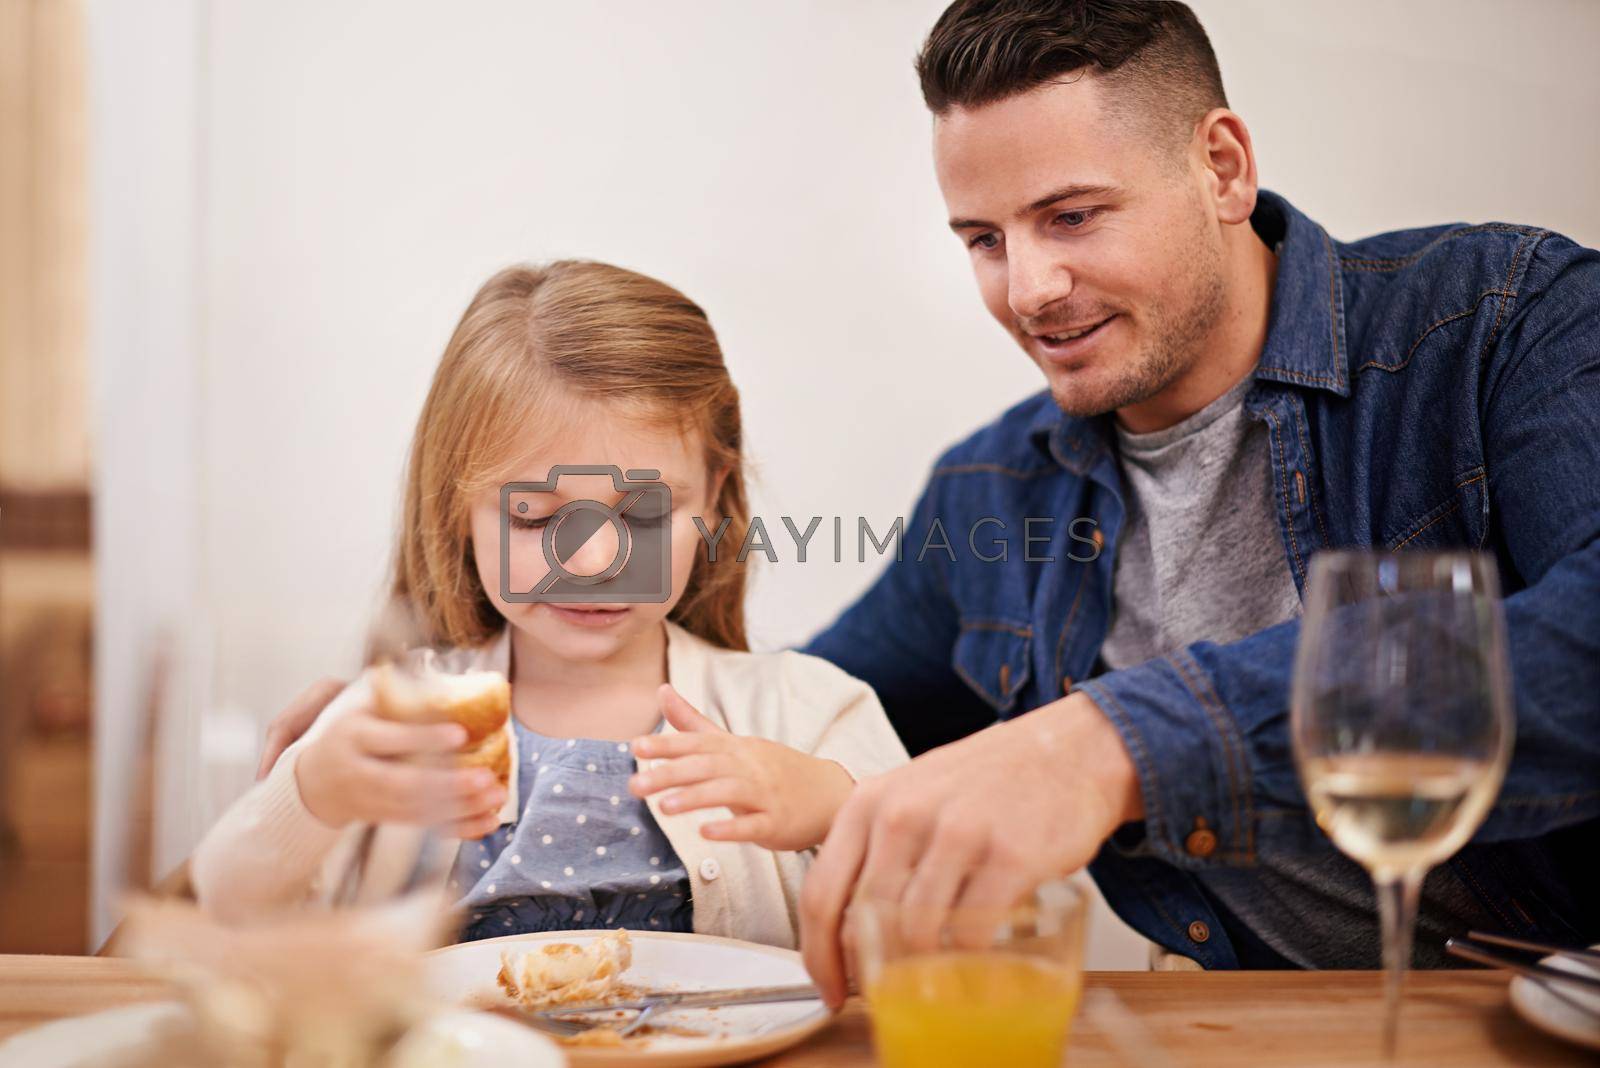 You finished, honey. a young father and his daughter sitting down to family dinner